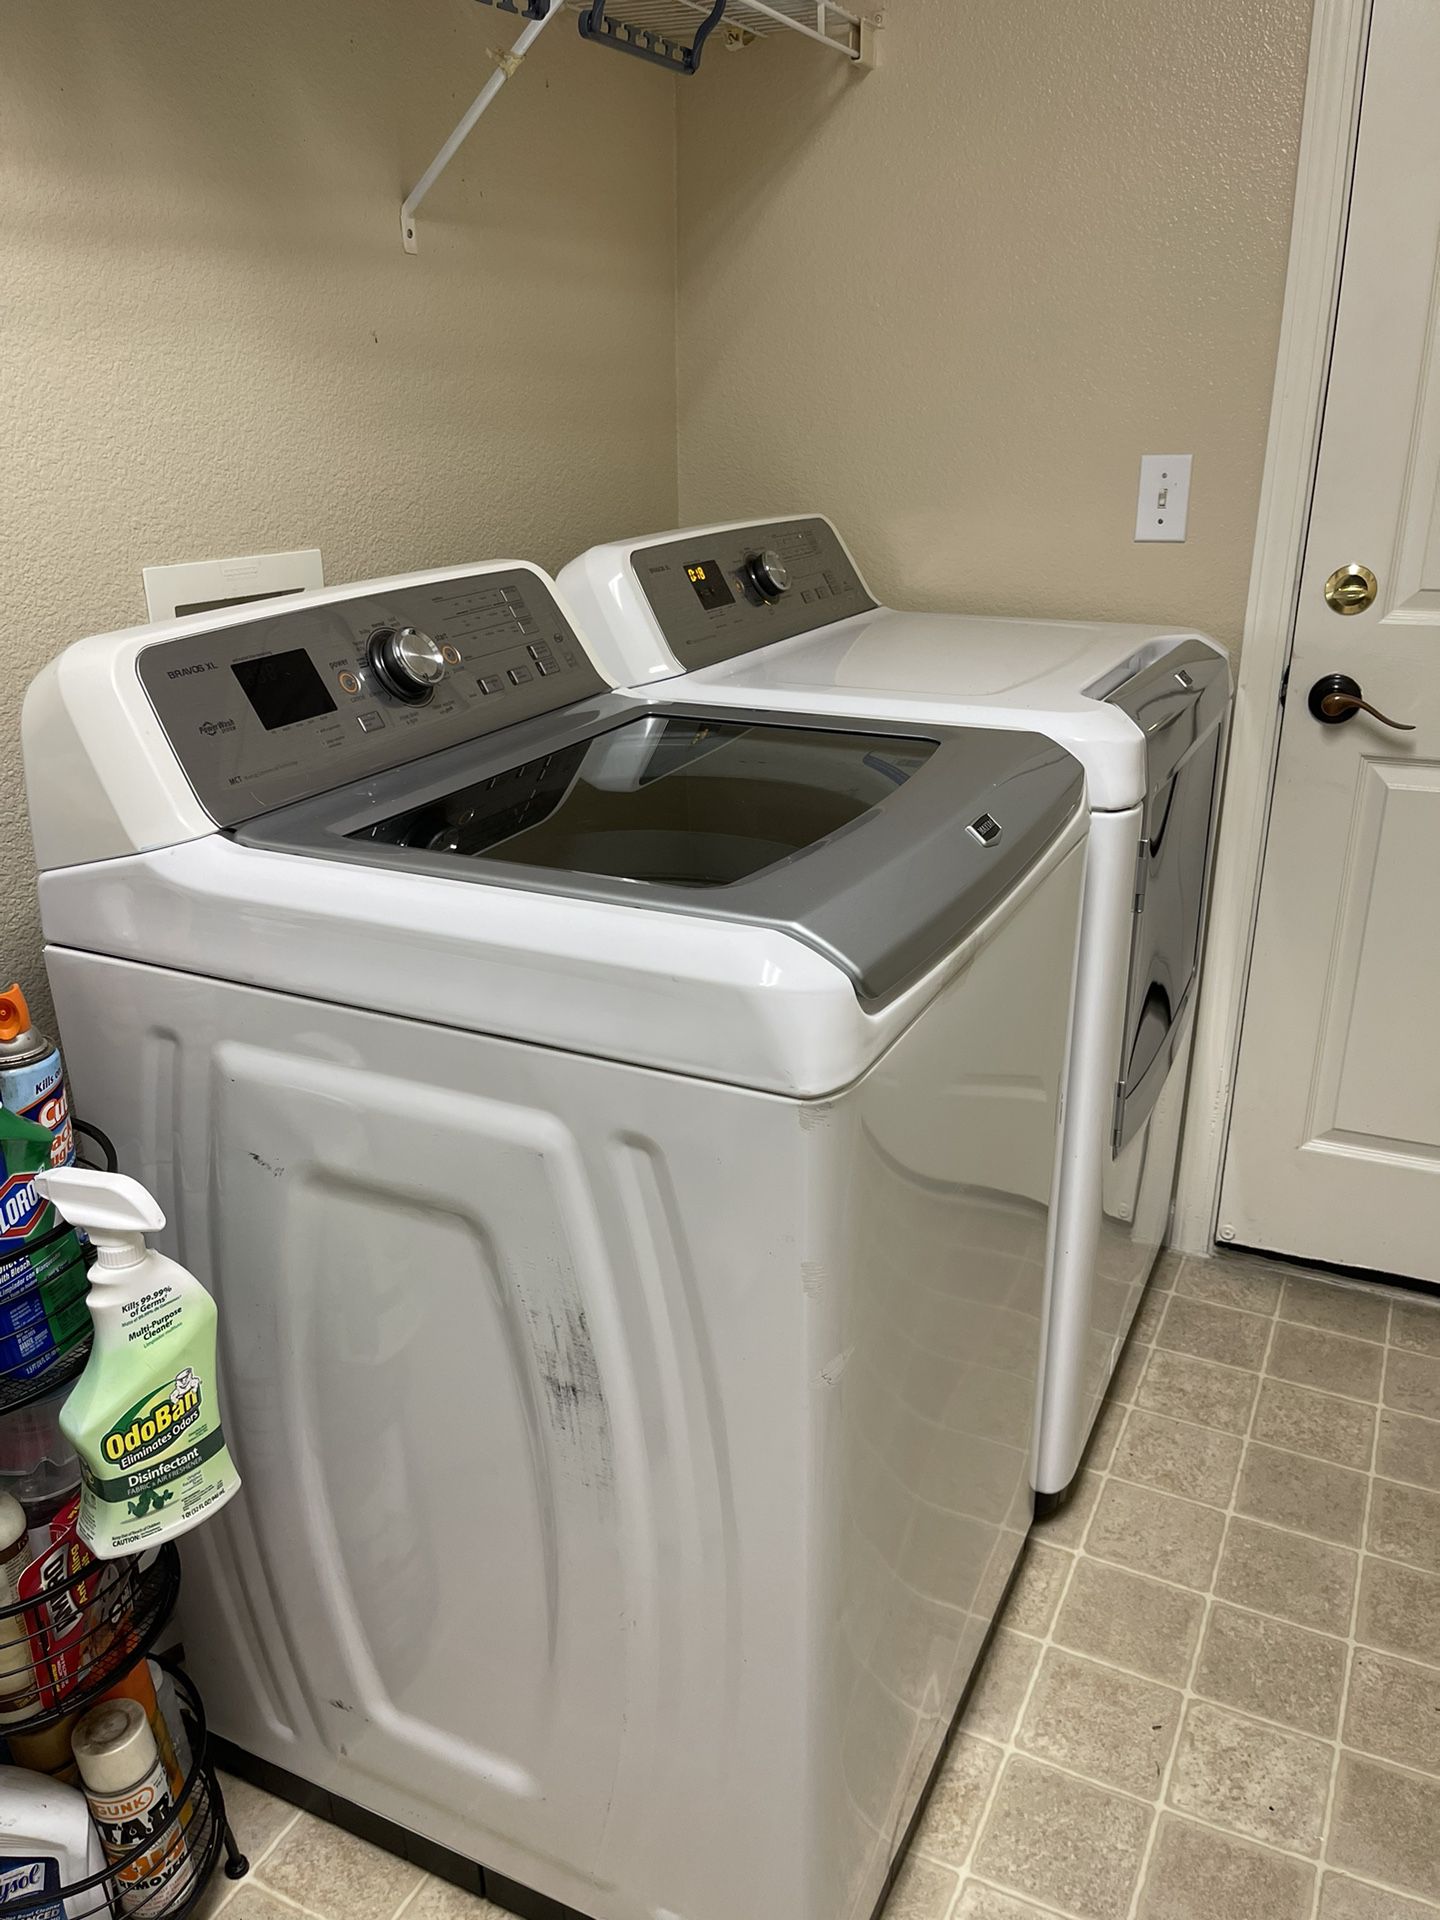 Gas Dryer And Free Washer Maytag Bravos